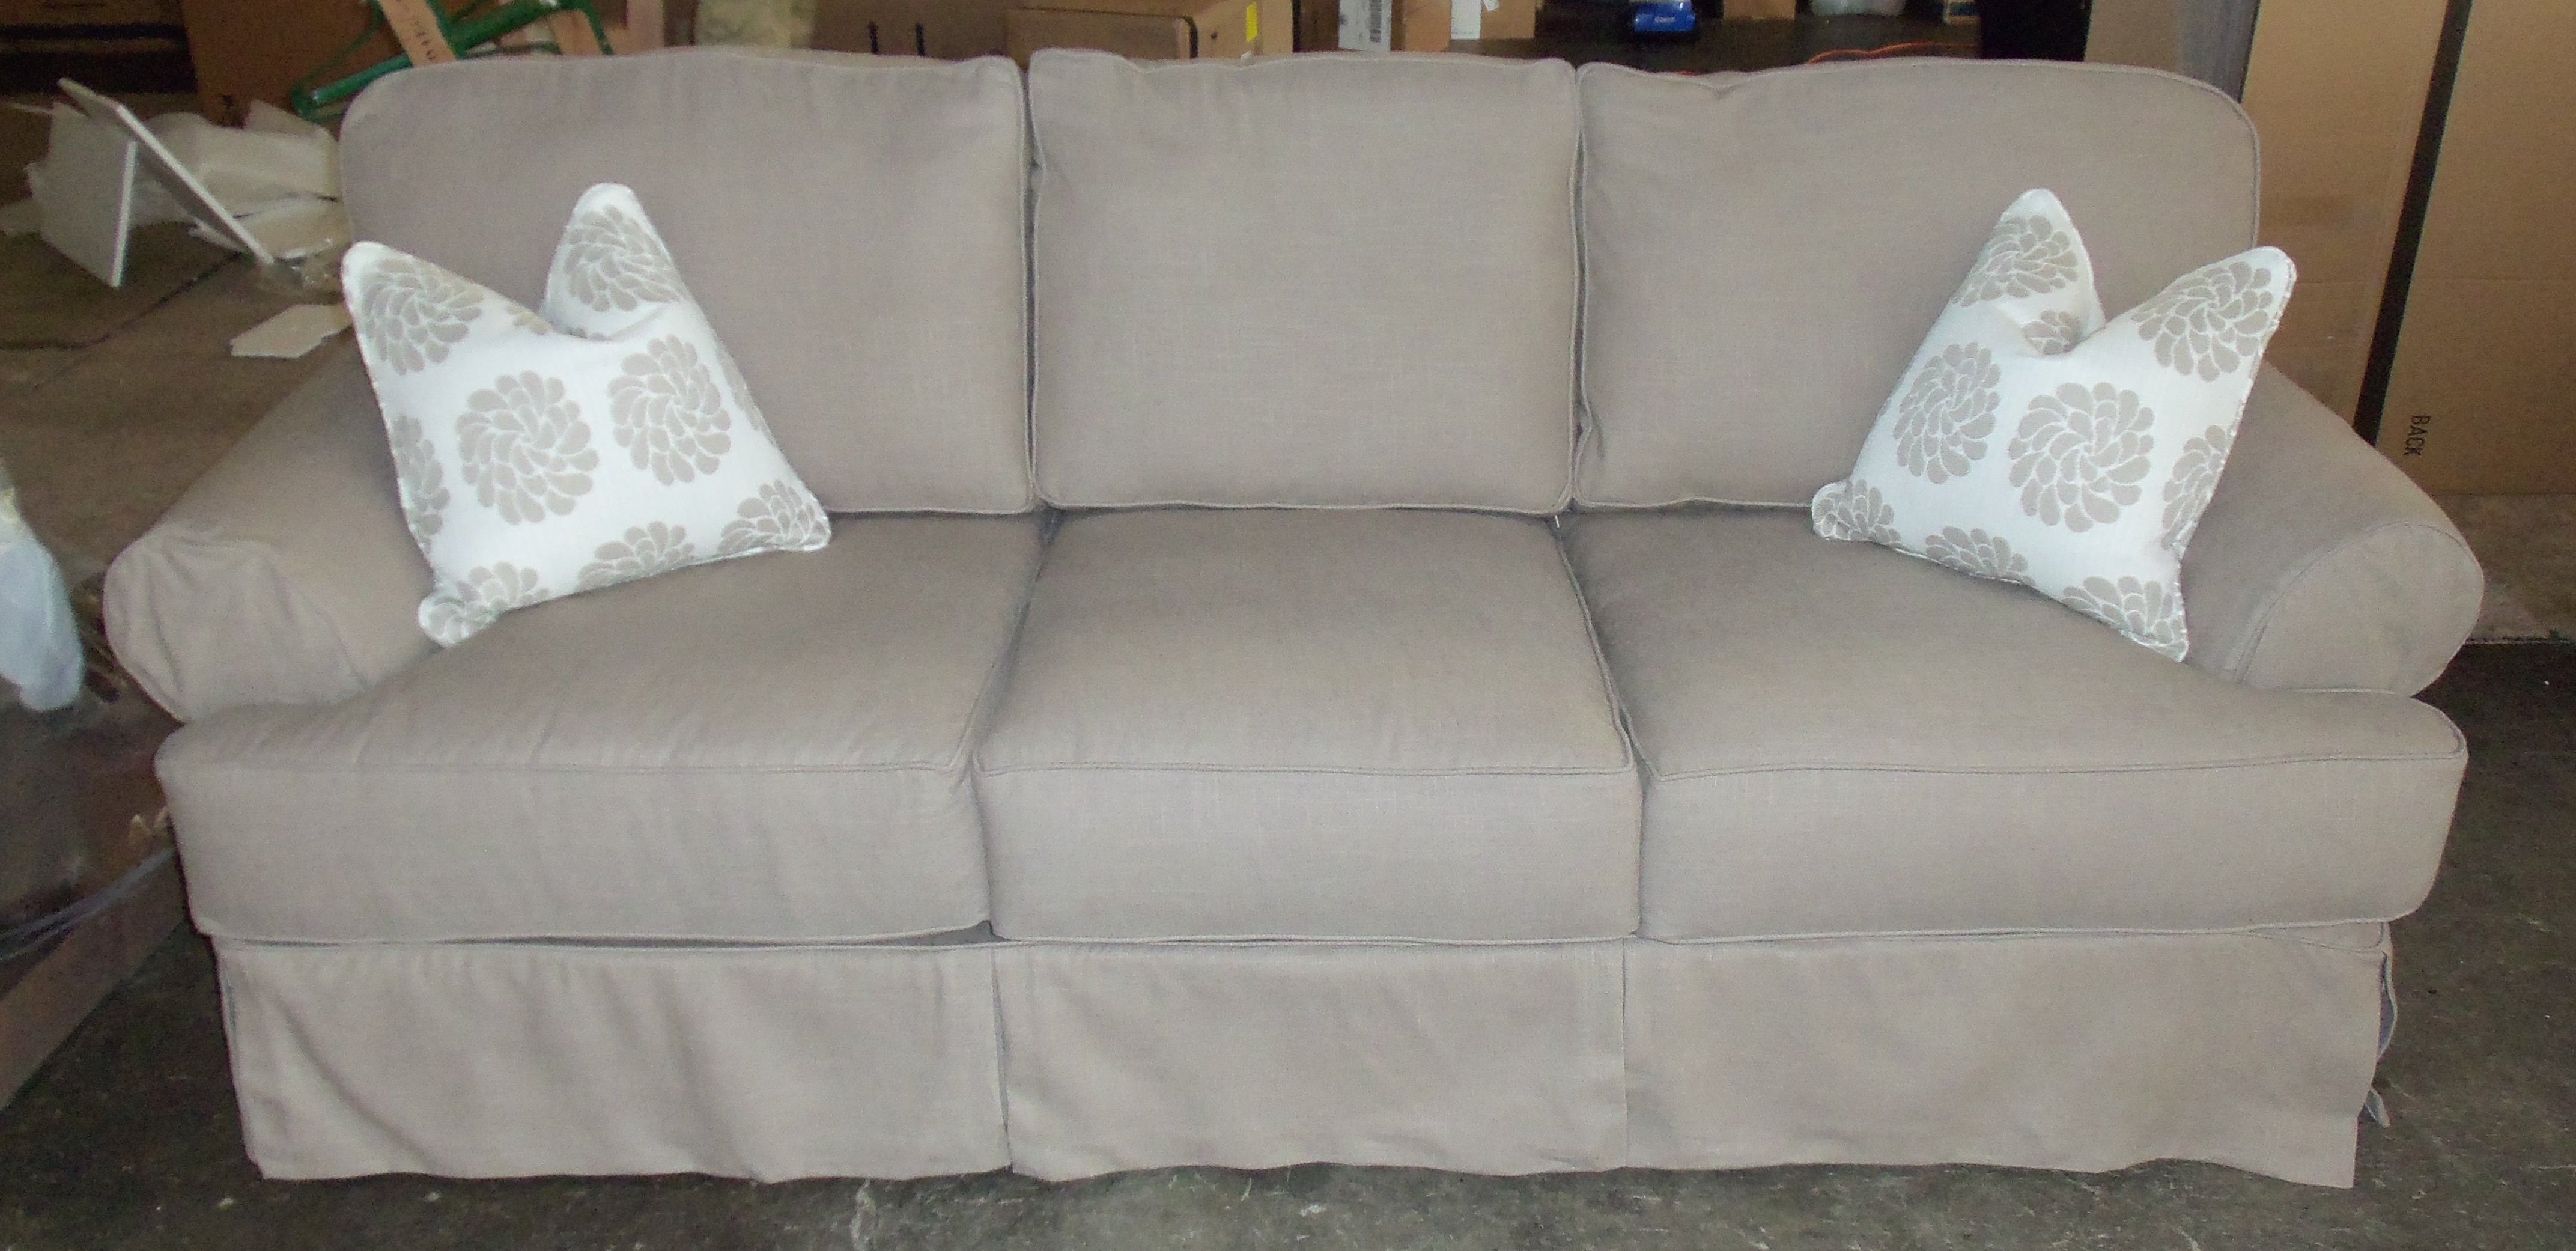 Sofas Center Piecea Covers Remarkable Picture Design Slipcovers Throughout 3 Piece Sectional Sofa Slipcovers (Photo 9 of 15)